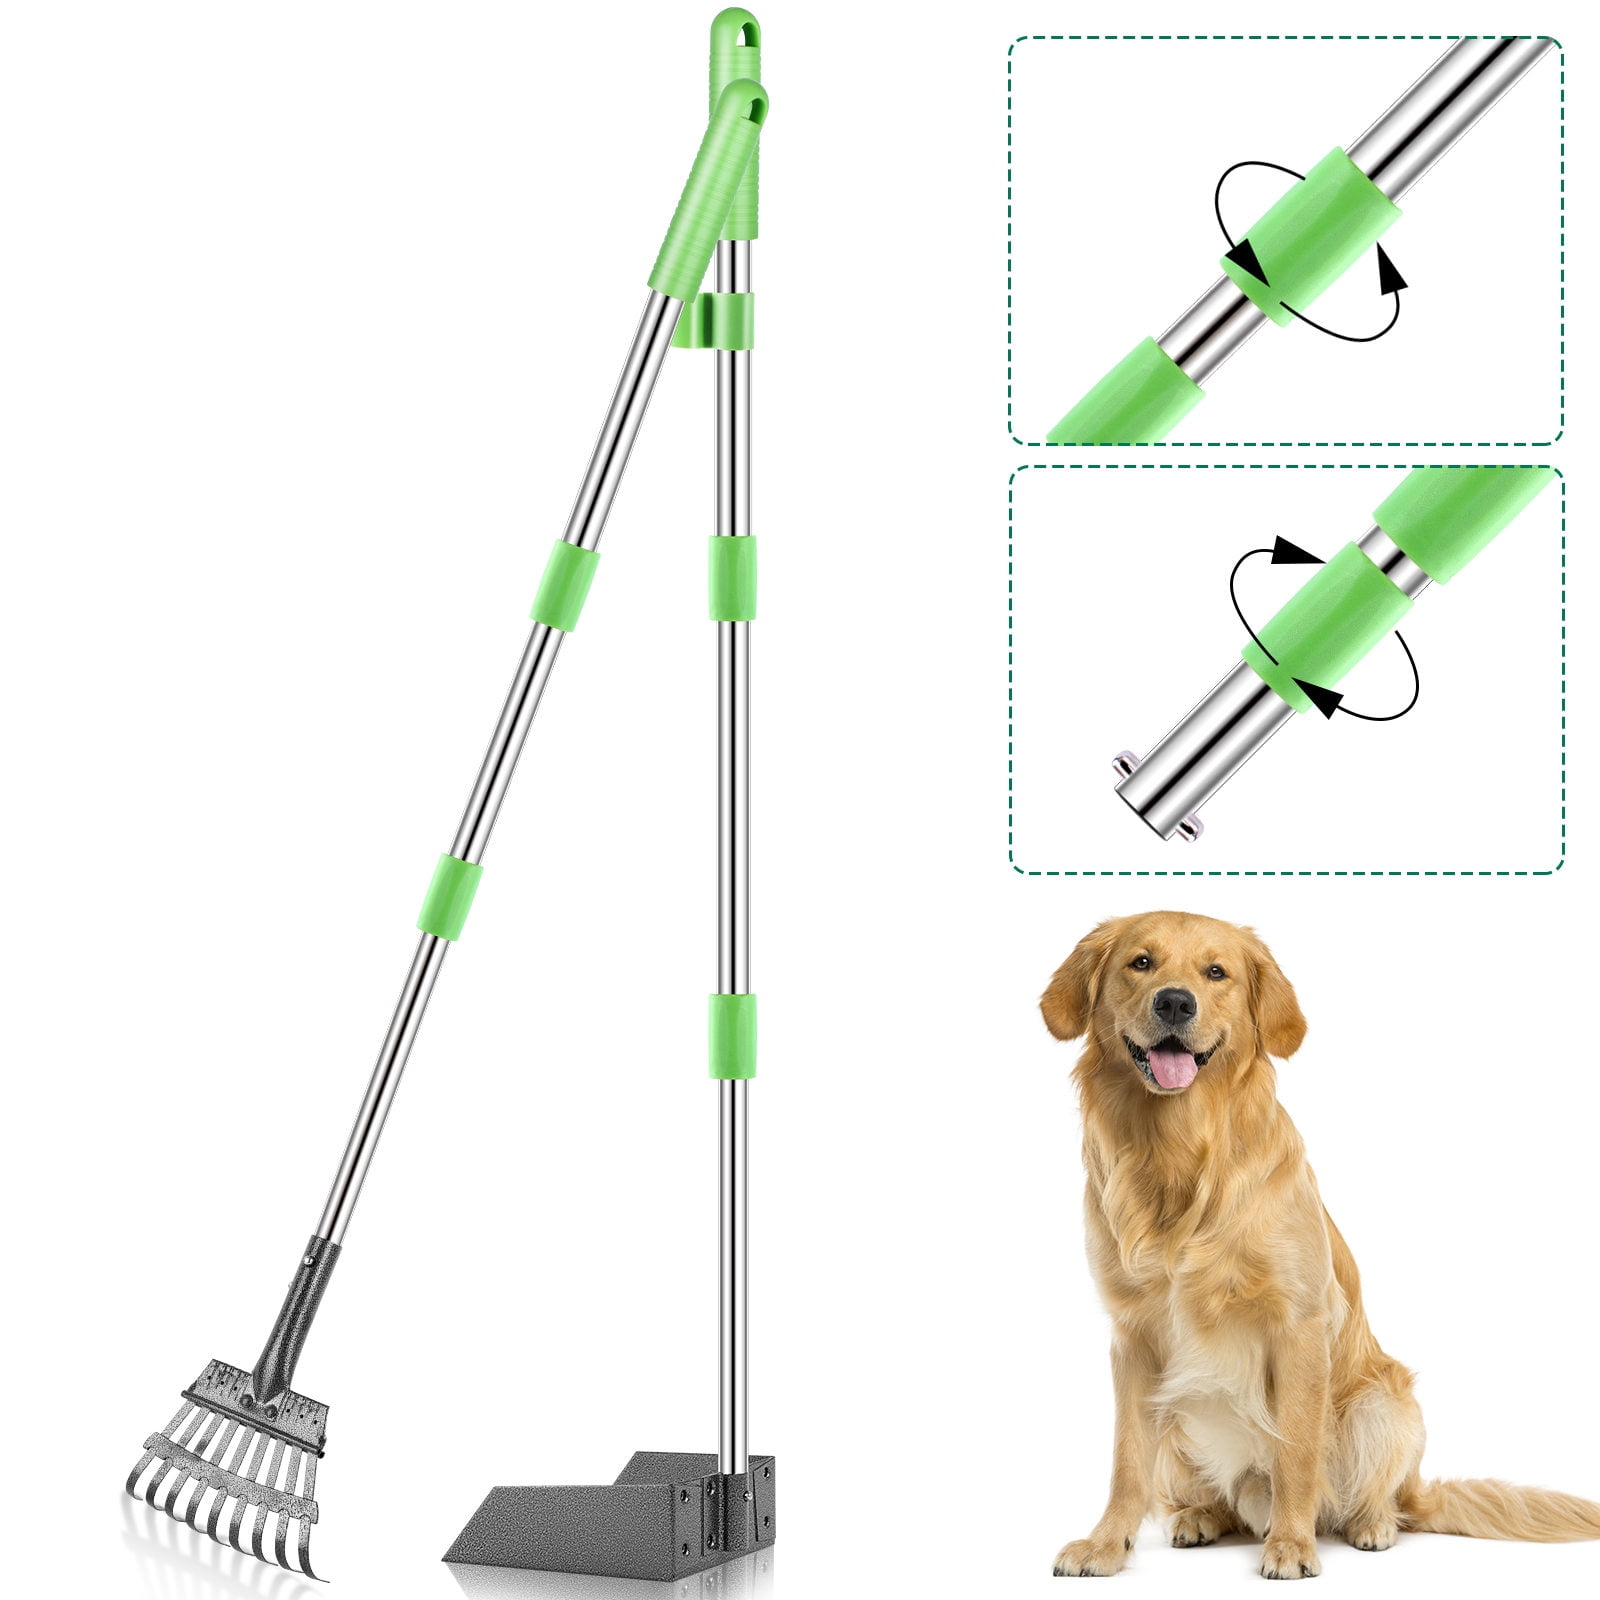 Lawns Gravel Amusingholiday Dog Pooper Scooper Waste Removal Scoop for Dirt Metal Pet Poop Rake and Tray & Spade Set with Long Extendable Handle for Small to Large Dogs Grass